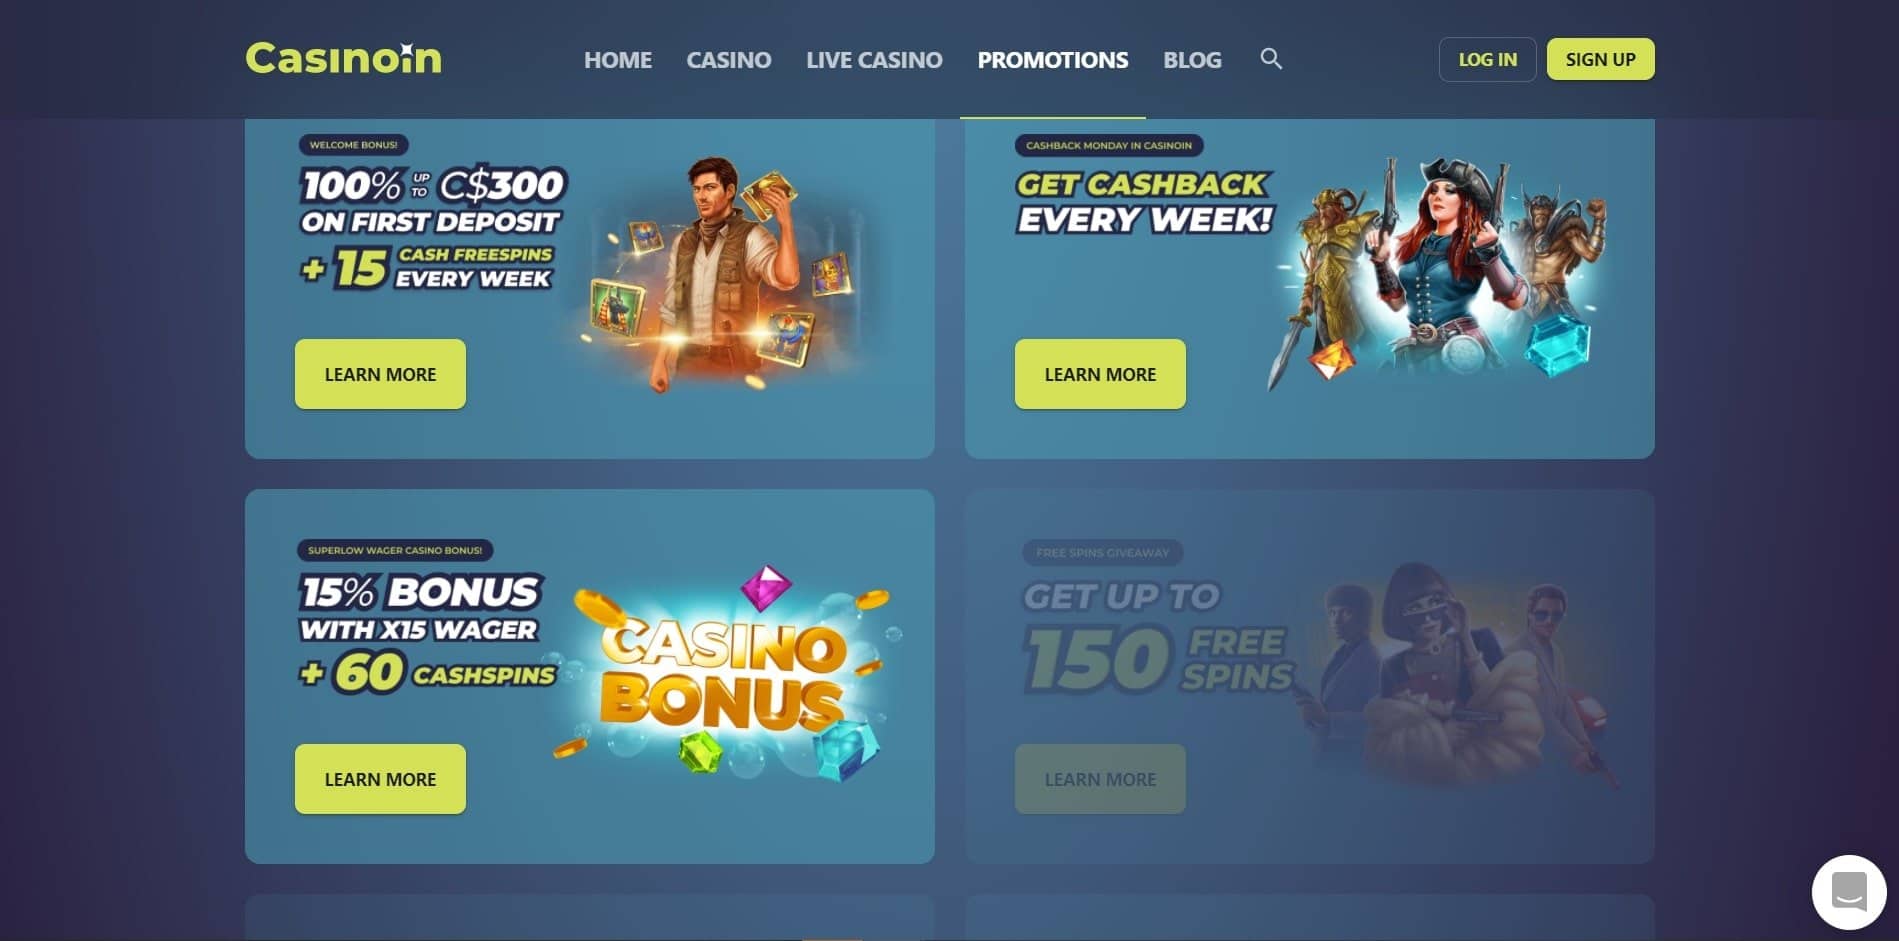 Casinoin Promotions